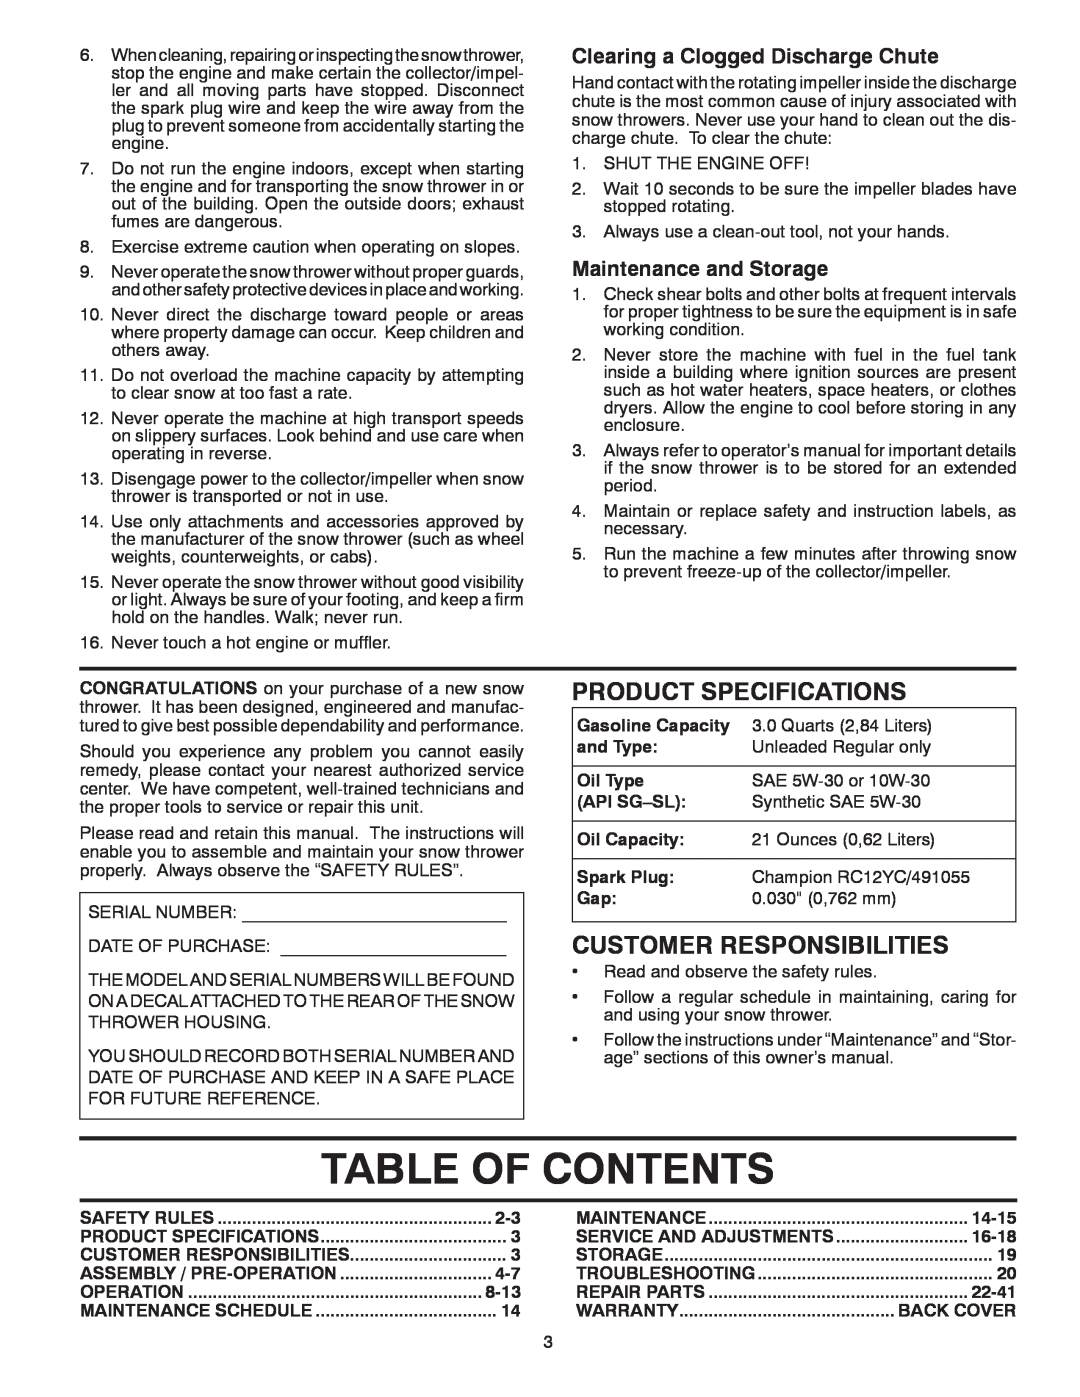 Poulan 438361 Table Of Contents, Product Specifications, Customer Responsibilities, Clearing a Clogged Discharge Chute 